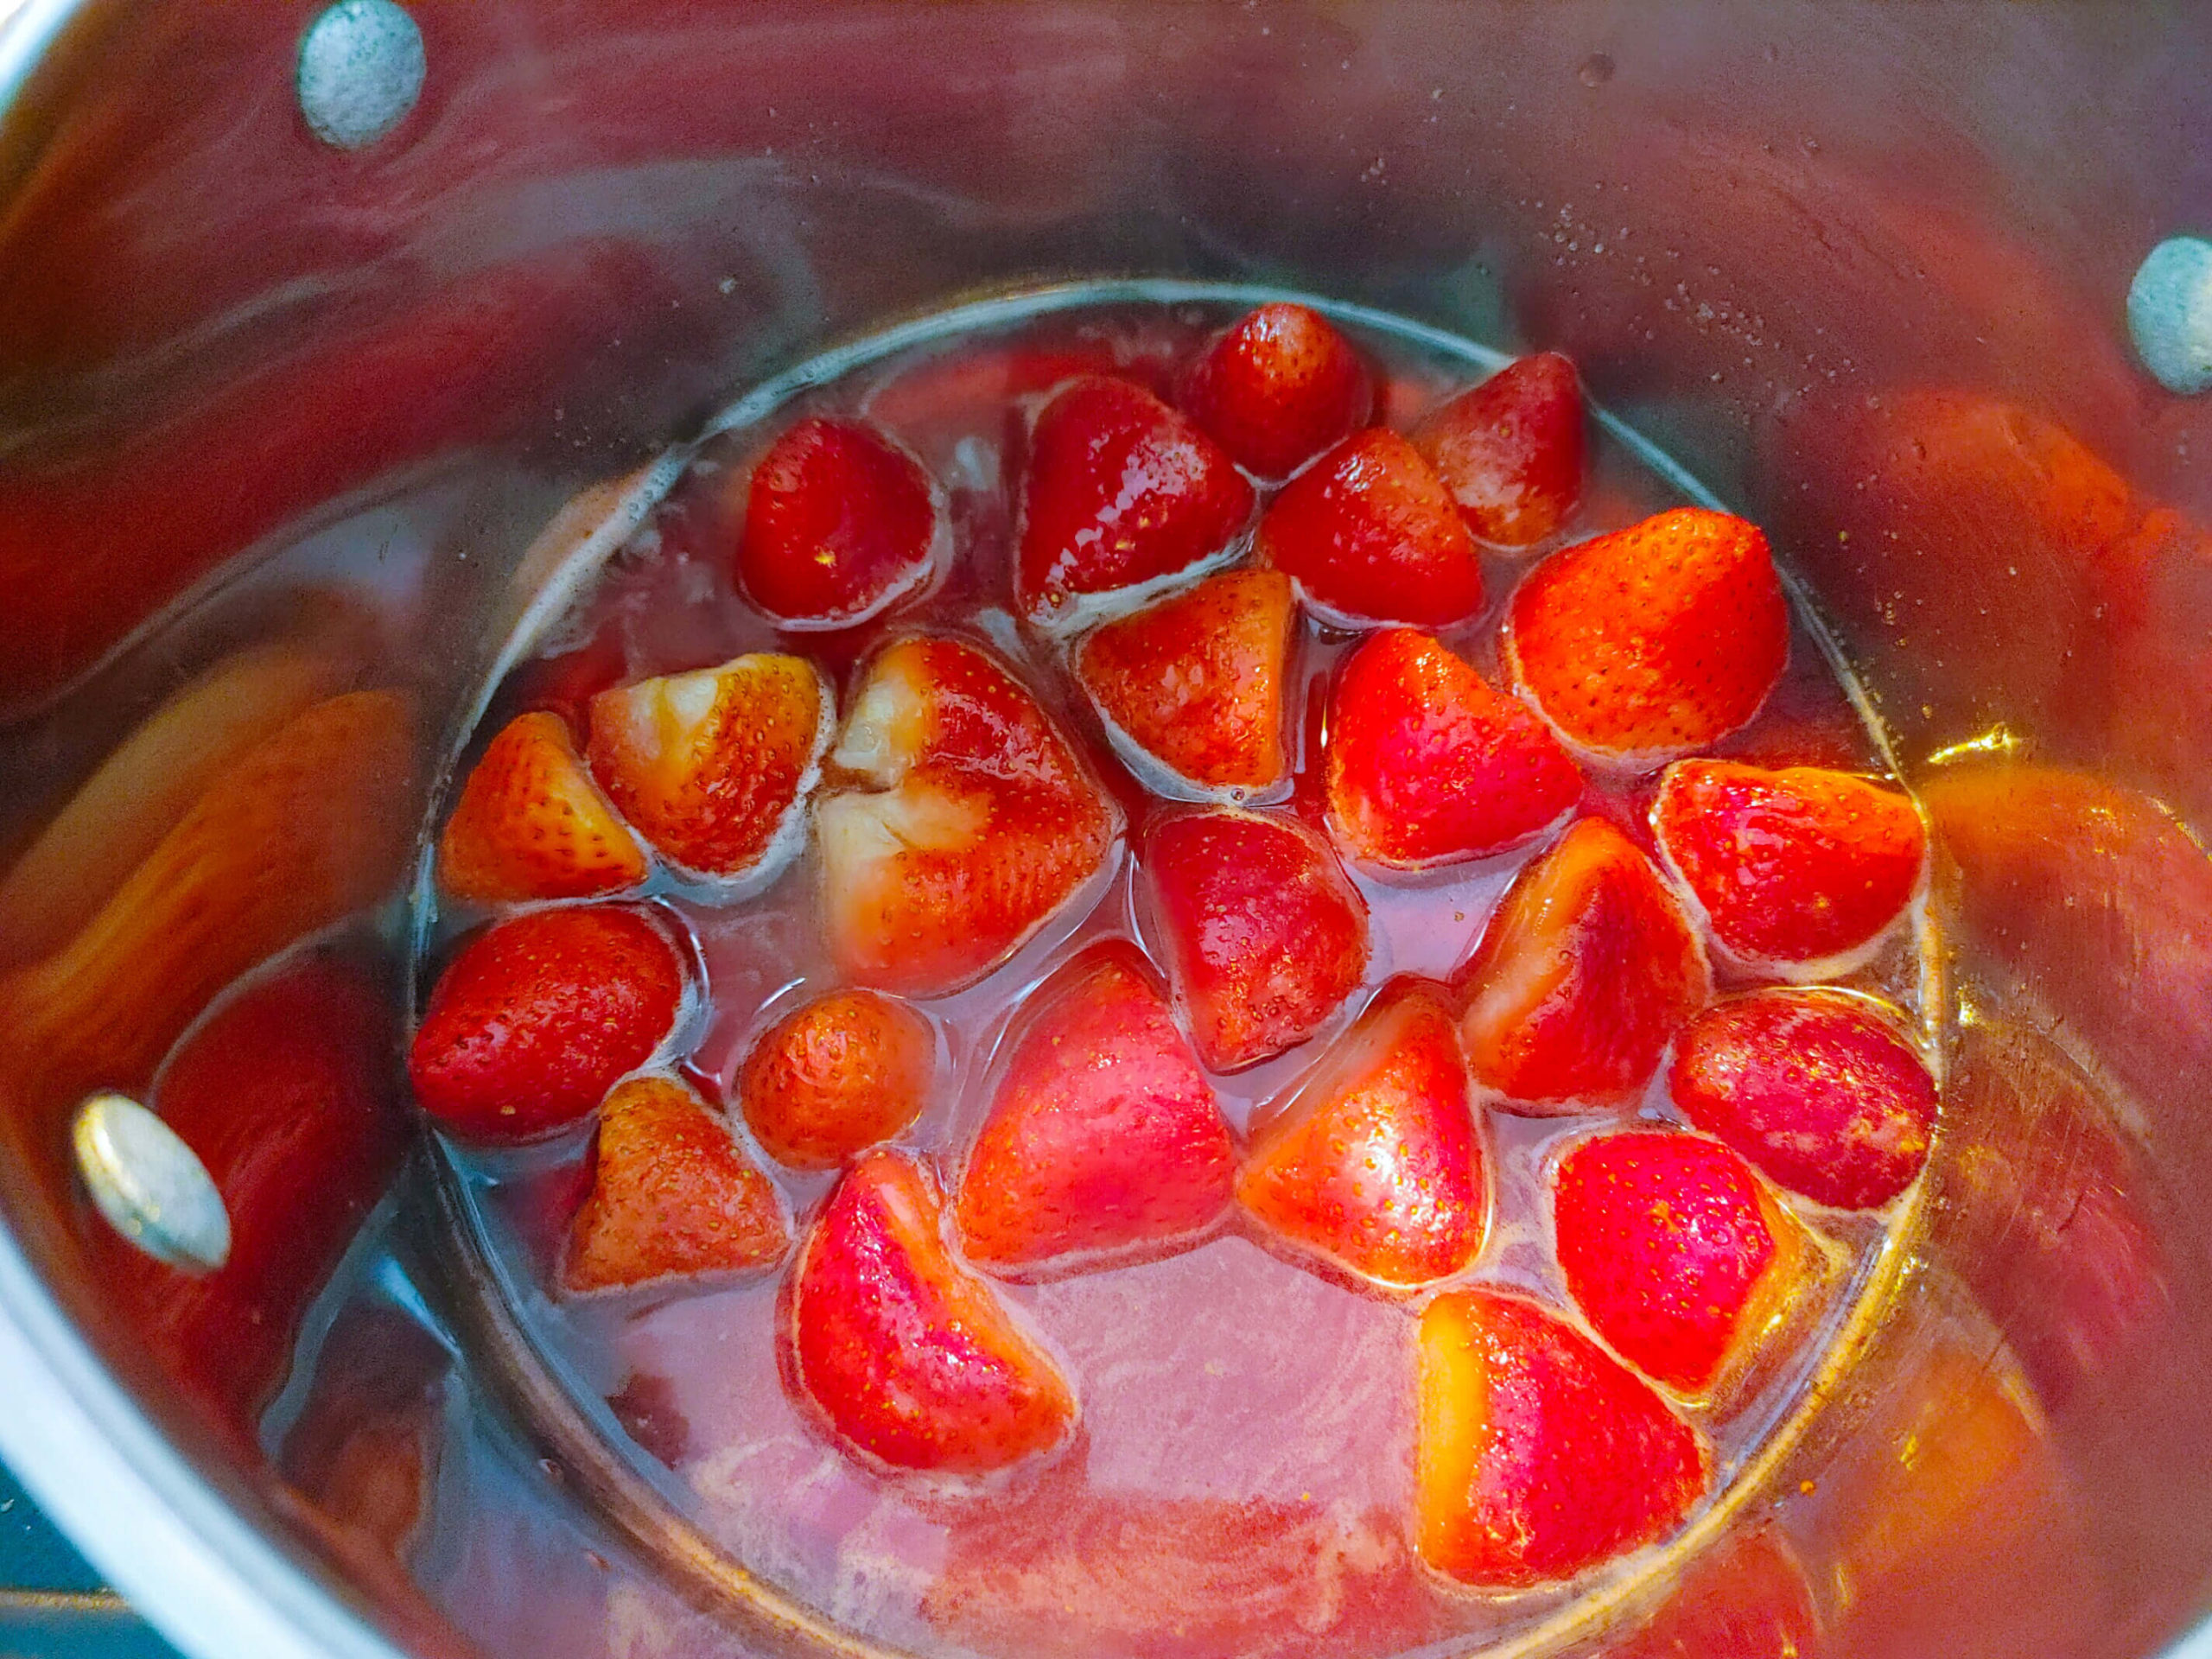 COOKING STRAWBERRIES FOR STRAWBERRY SWIRL SAUCE